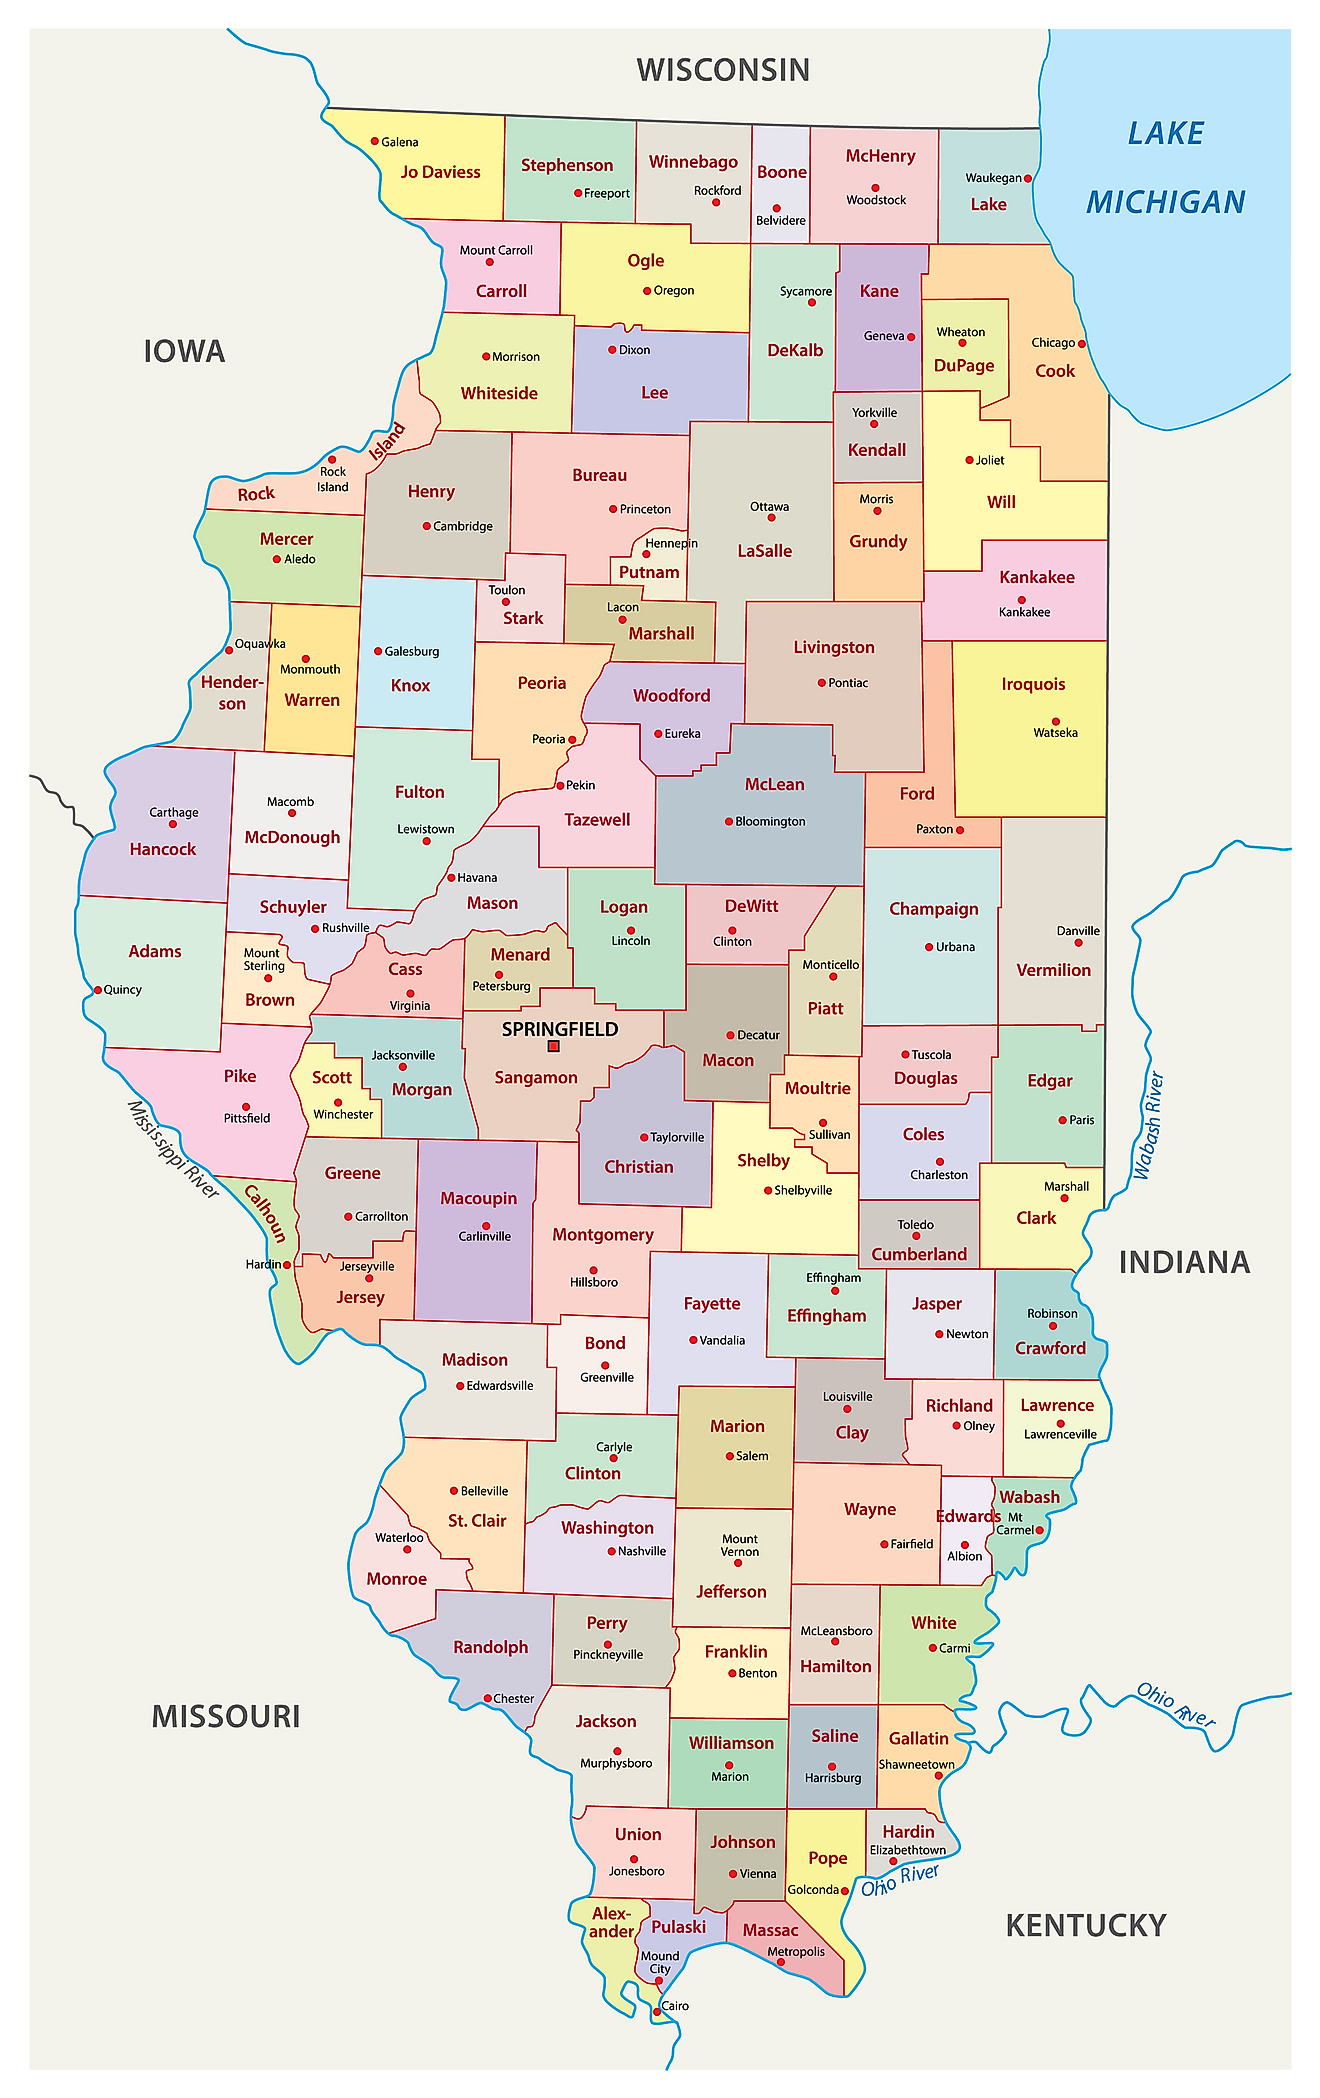 Administrative Map of Illinois showing its 102 counties and the capital city - Springfield